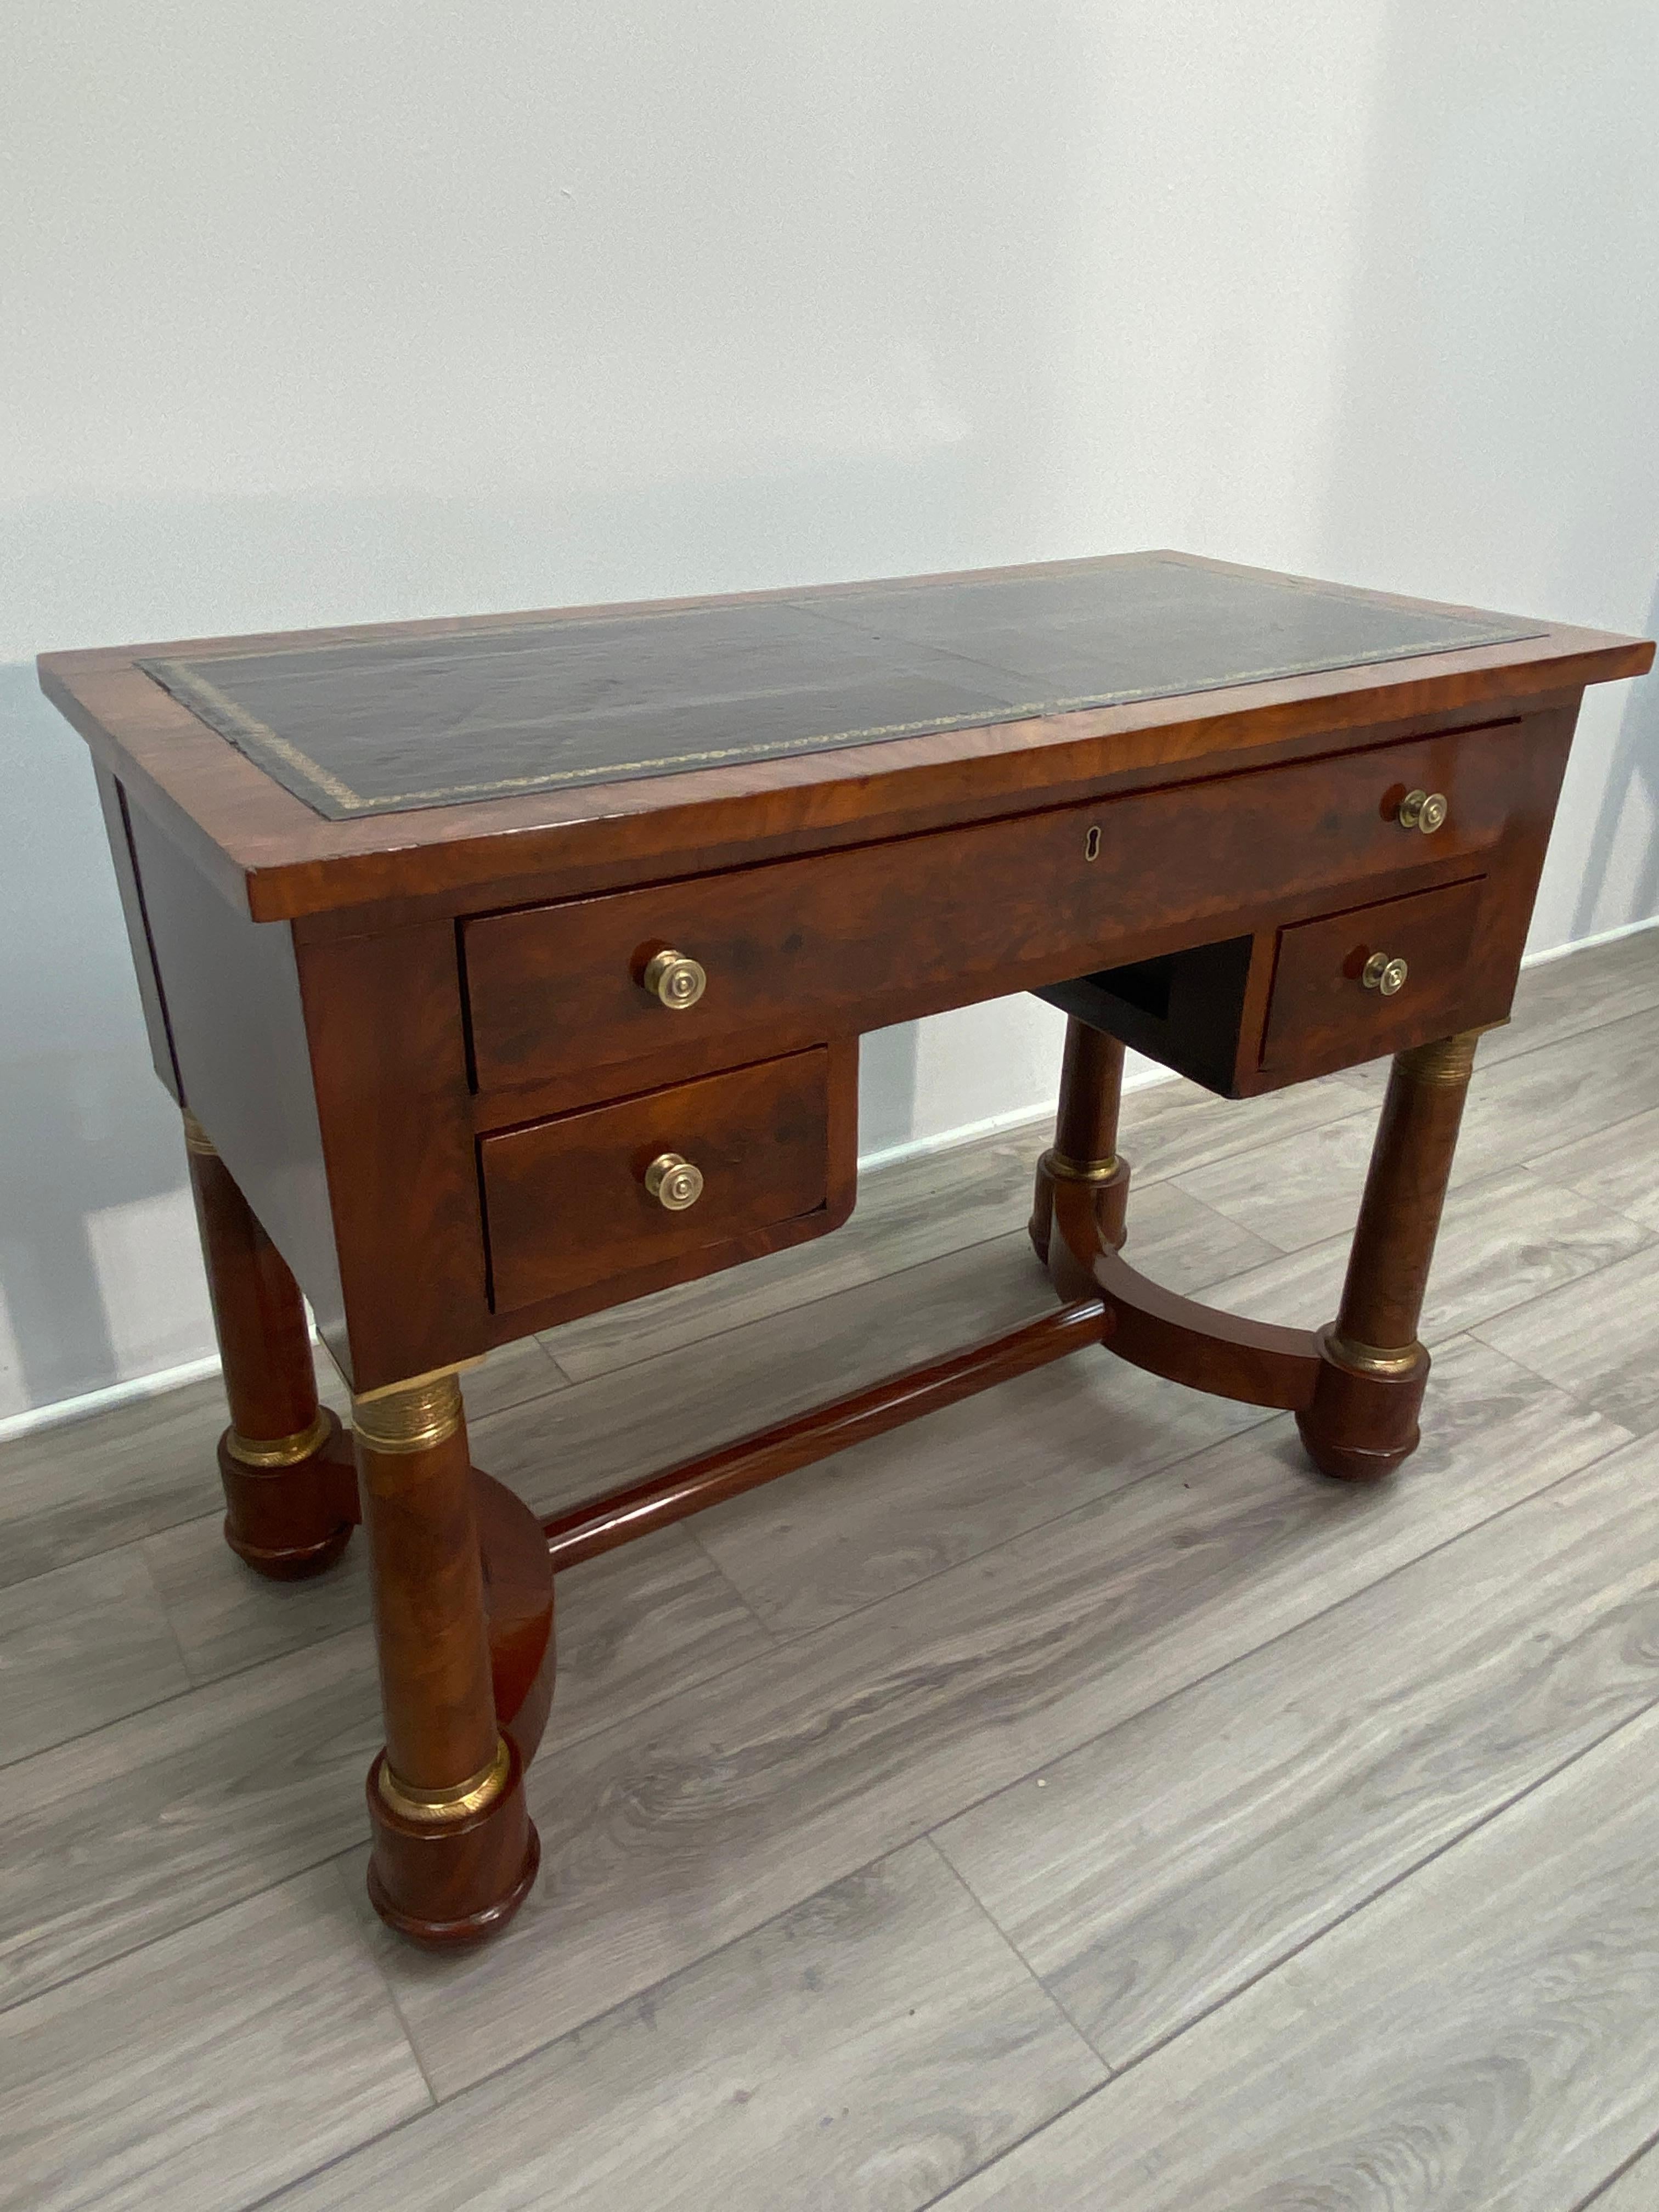 Polished Early 19th Century French Empire Desk For Sale